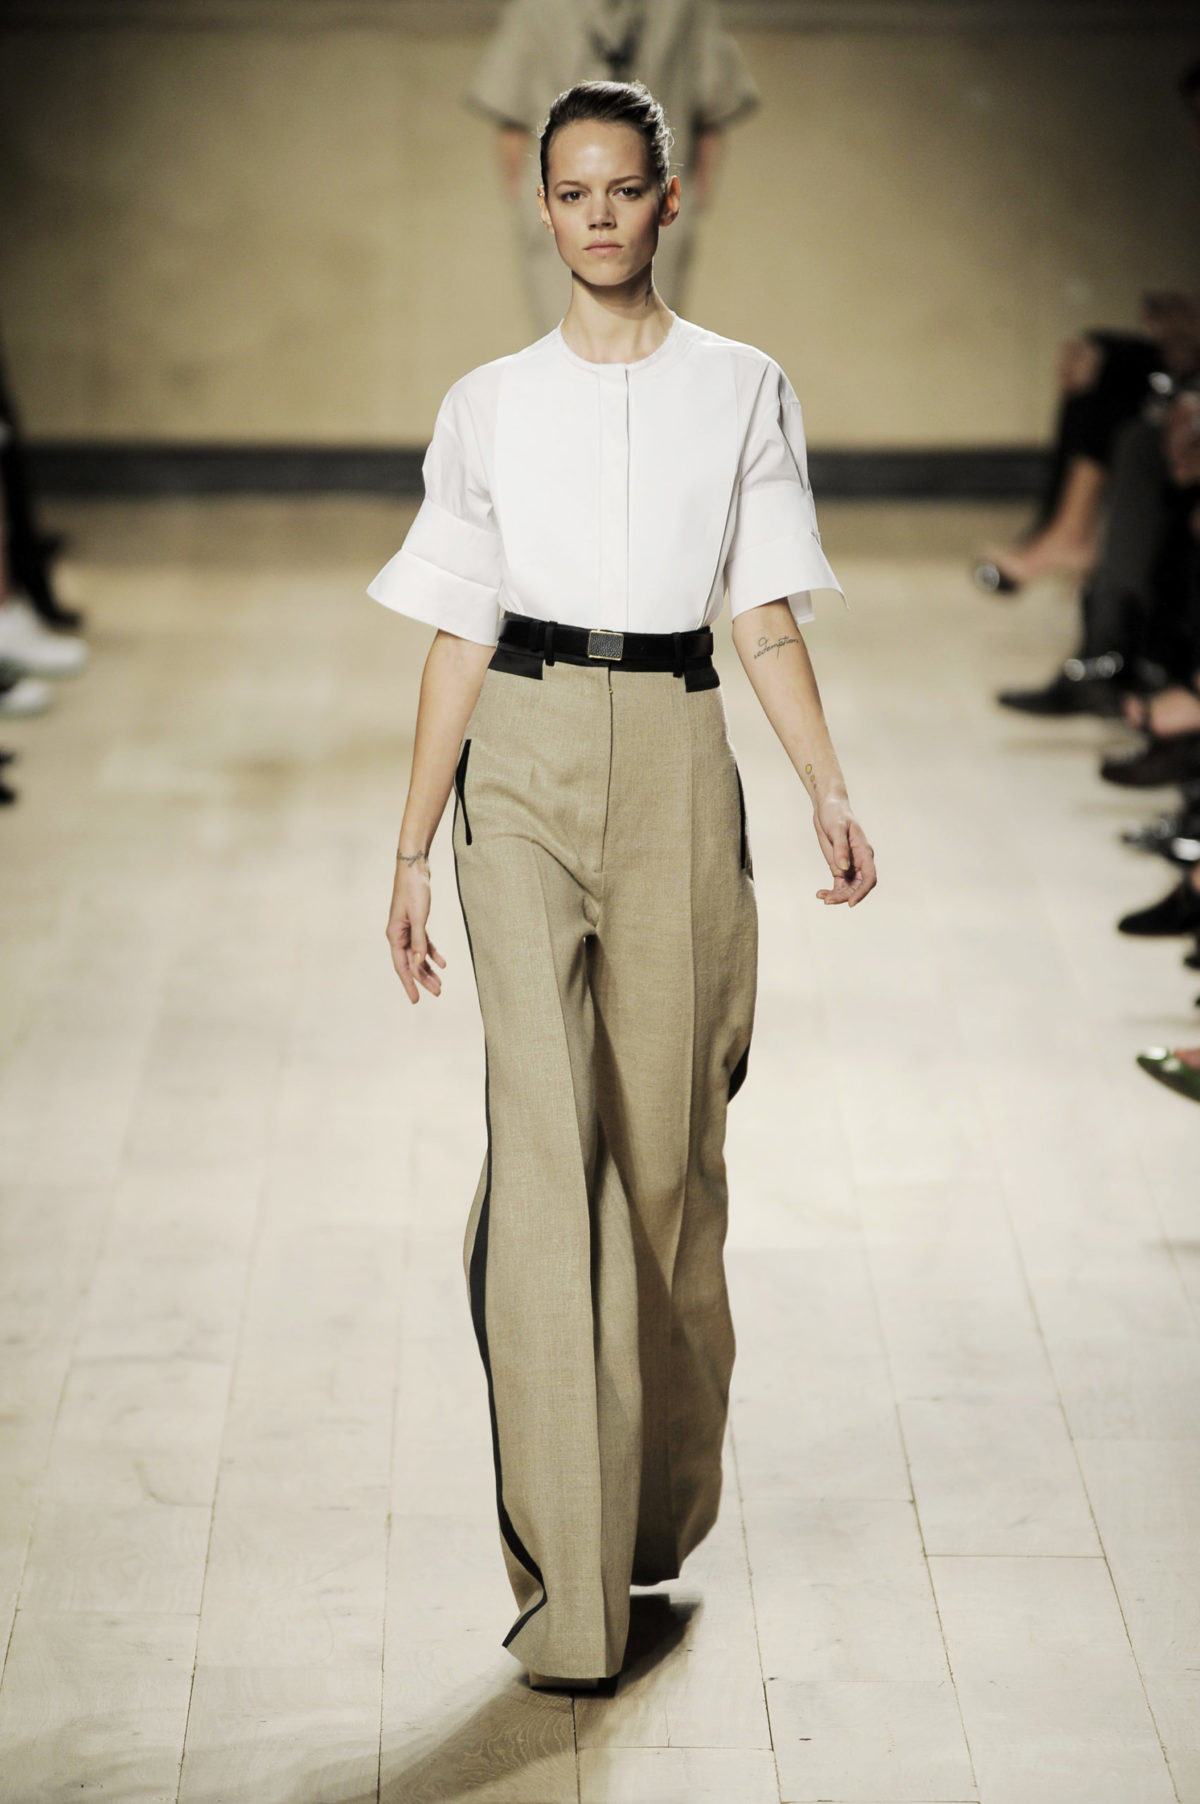 Phoebe Philo New Brand: Designer Returns with Her Own Label Oct. 30 ...